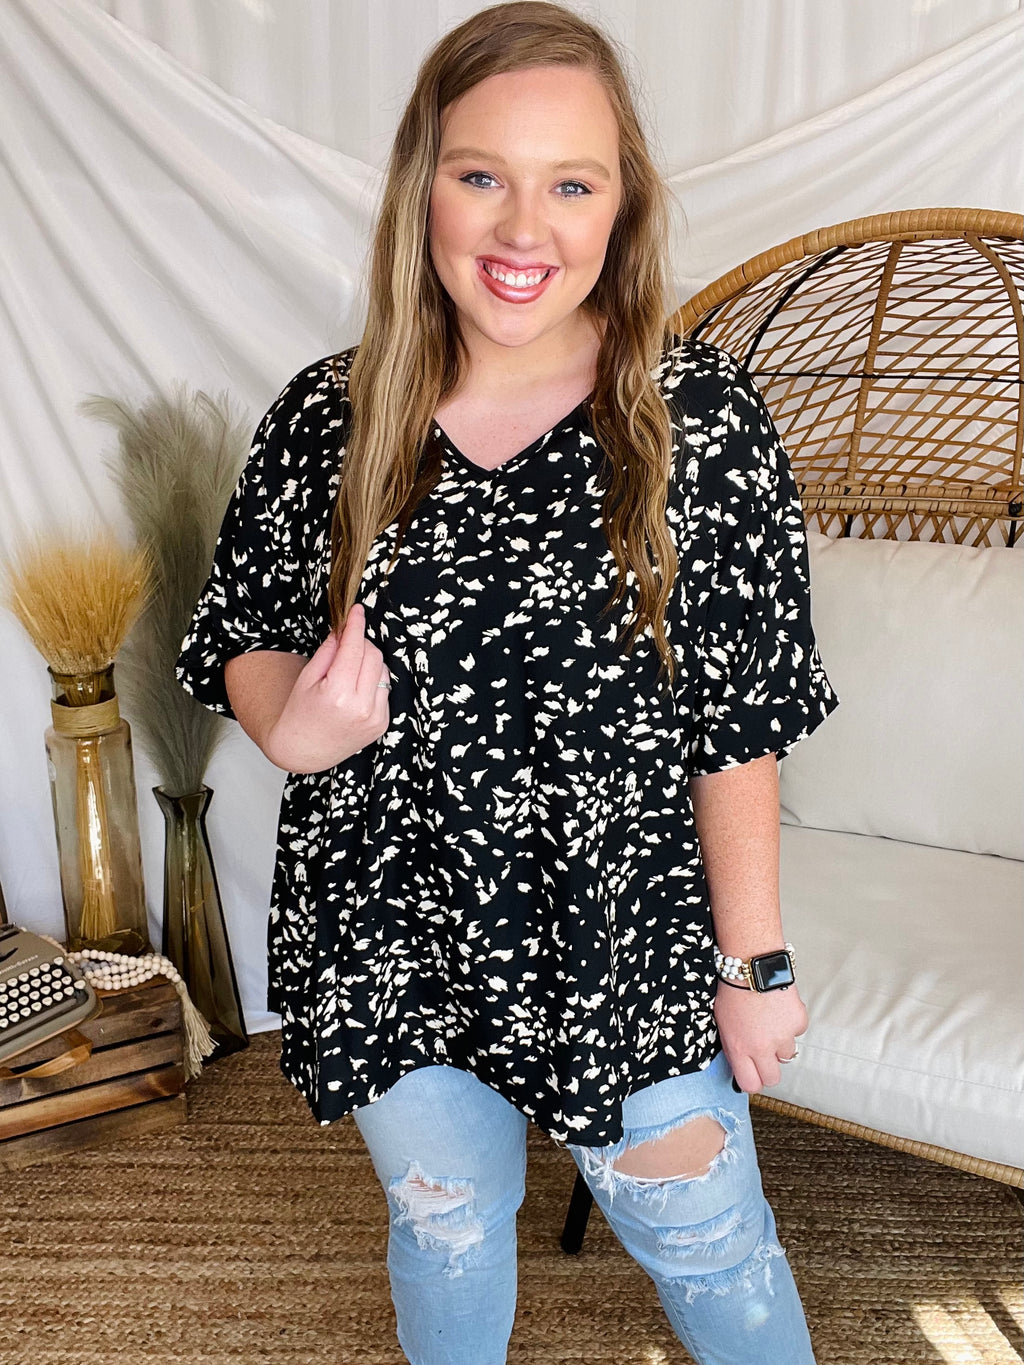 Comfortable Hour Top - The Sassy Owl Boutique